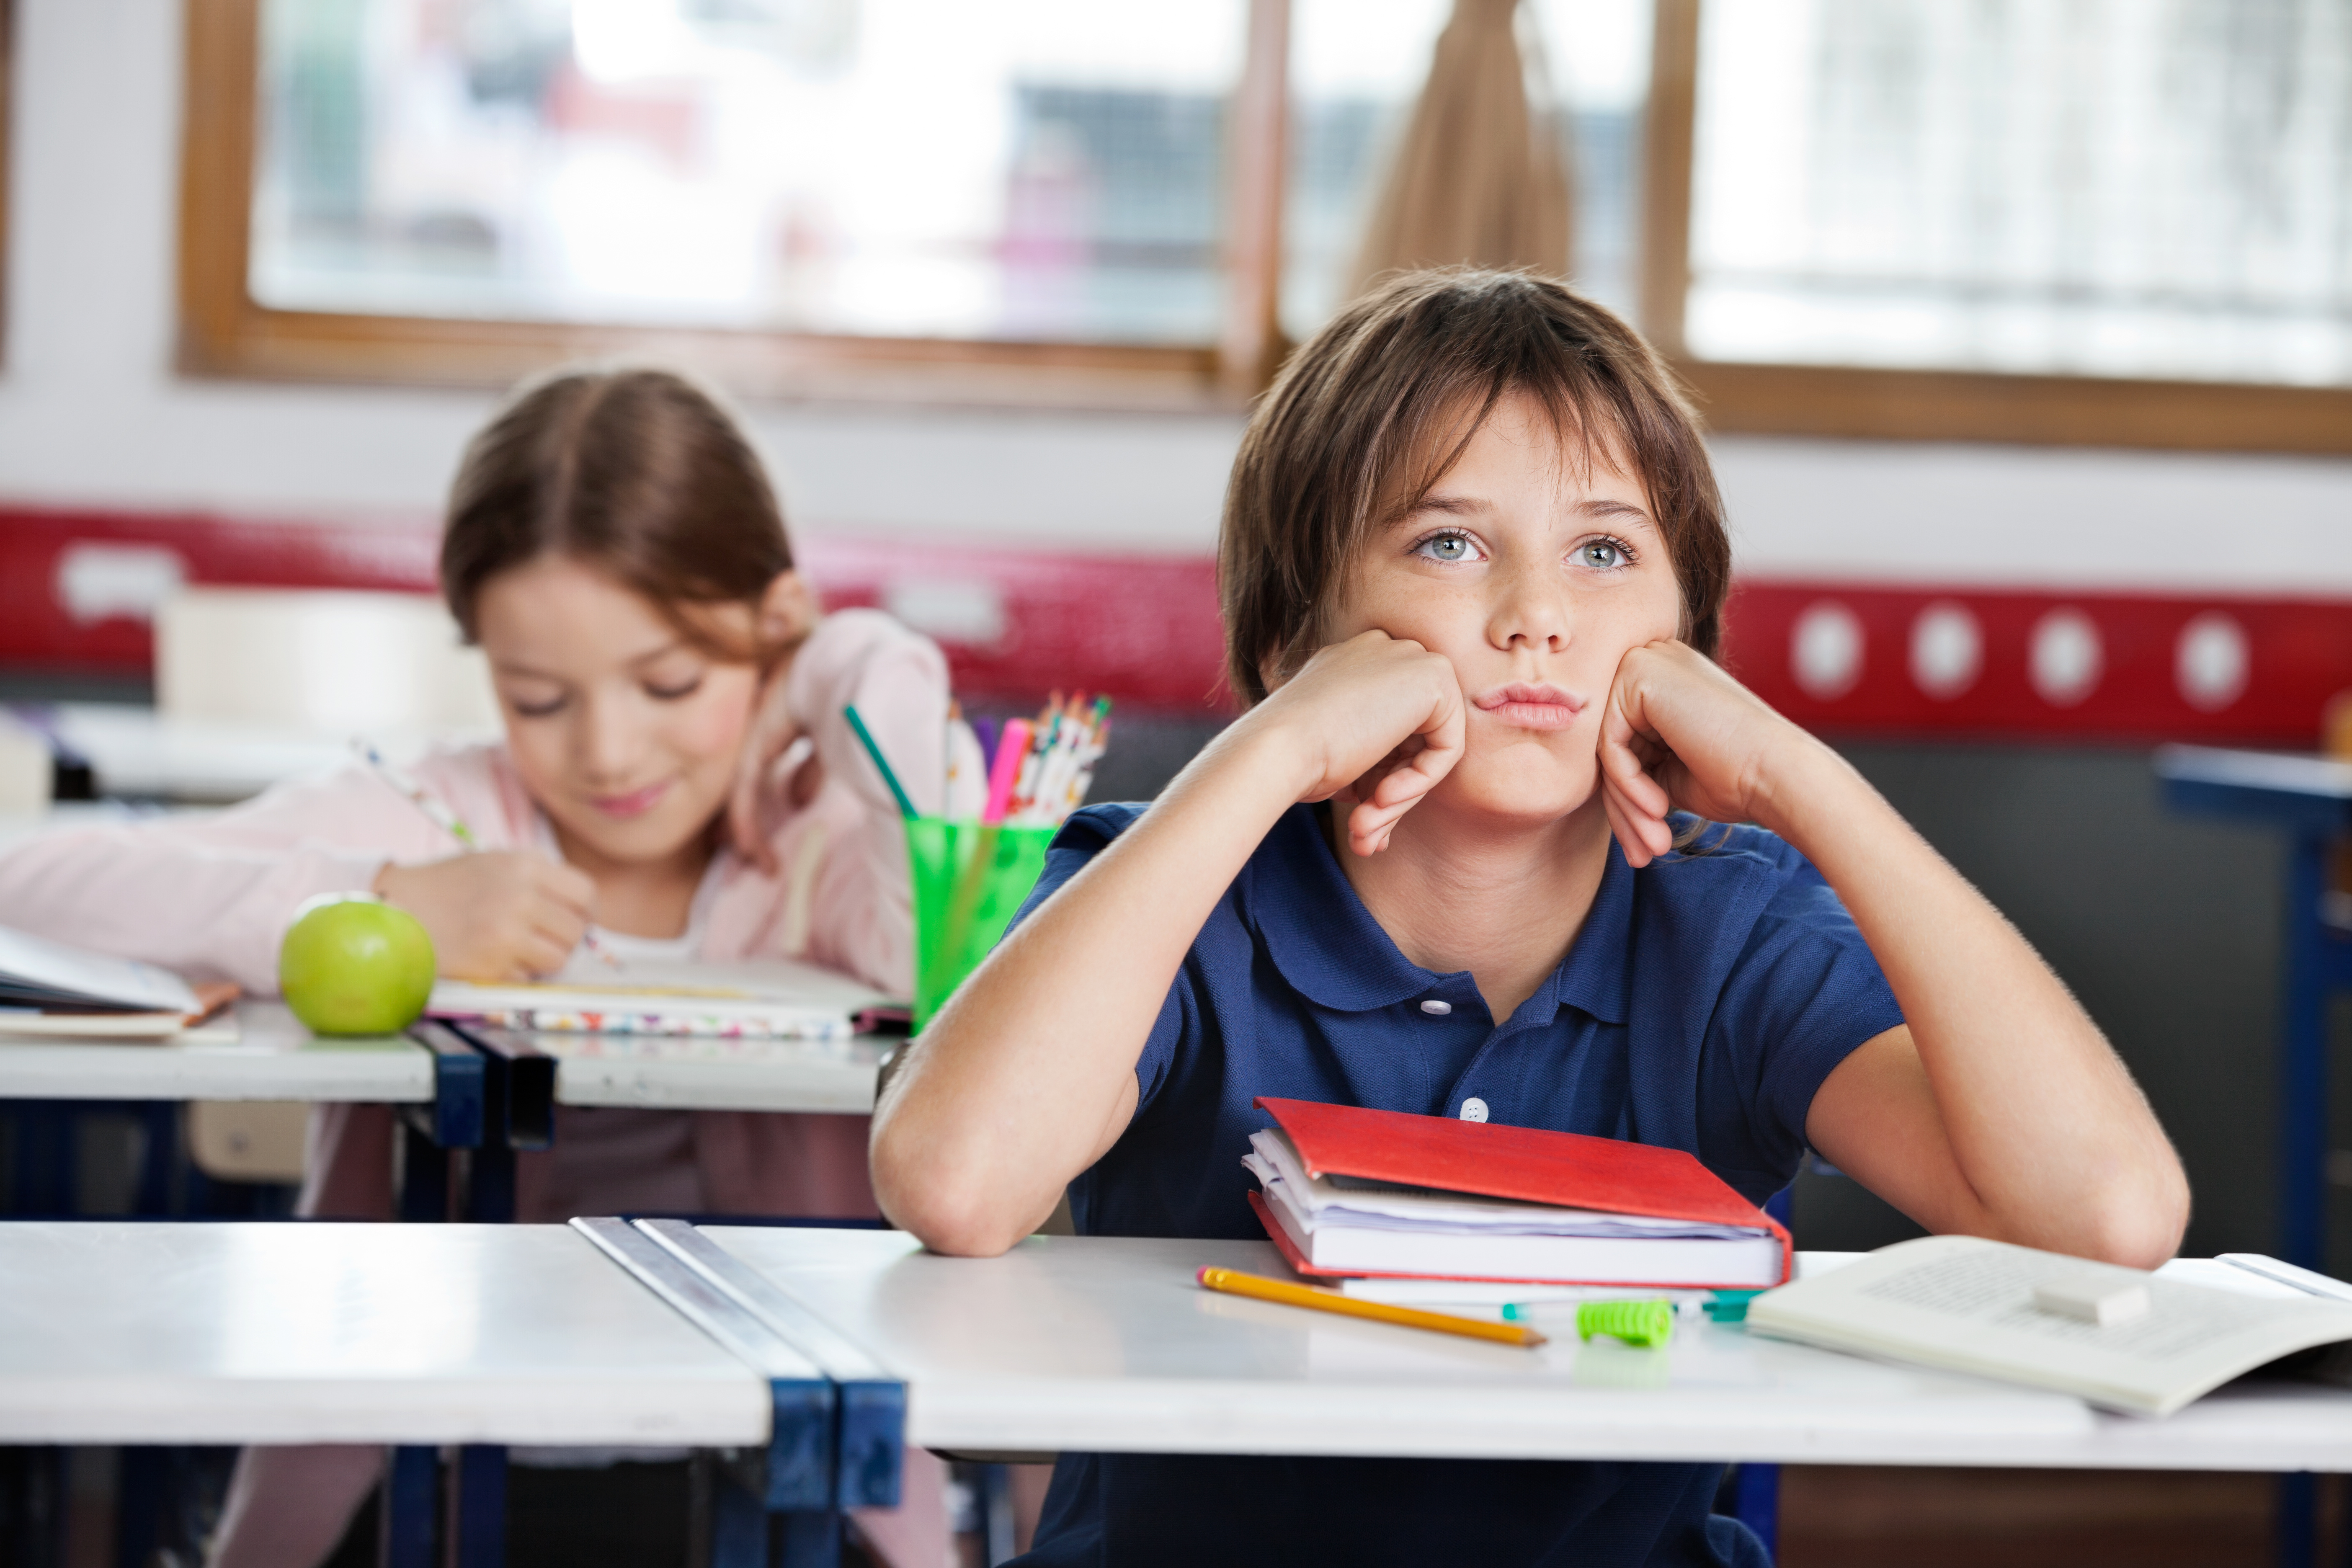 Bored schoolboy looking away while sitting at desk with girl in background at classroom